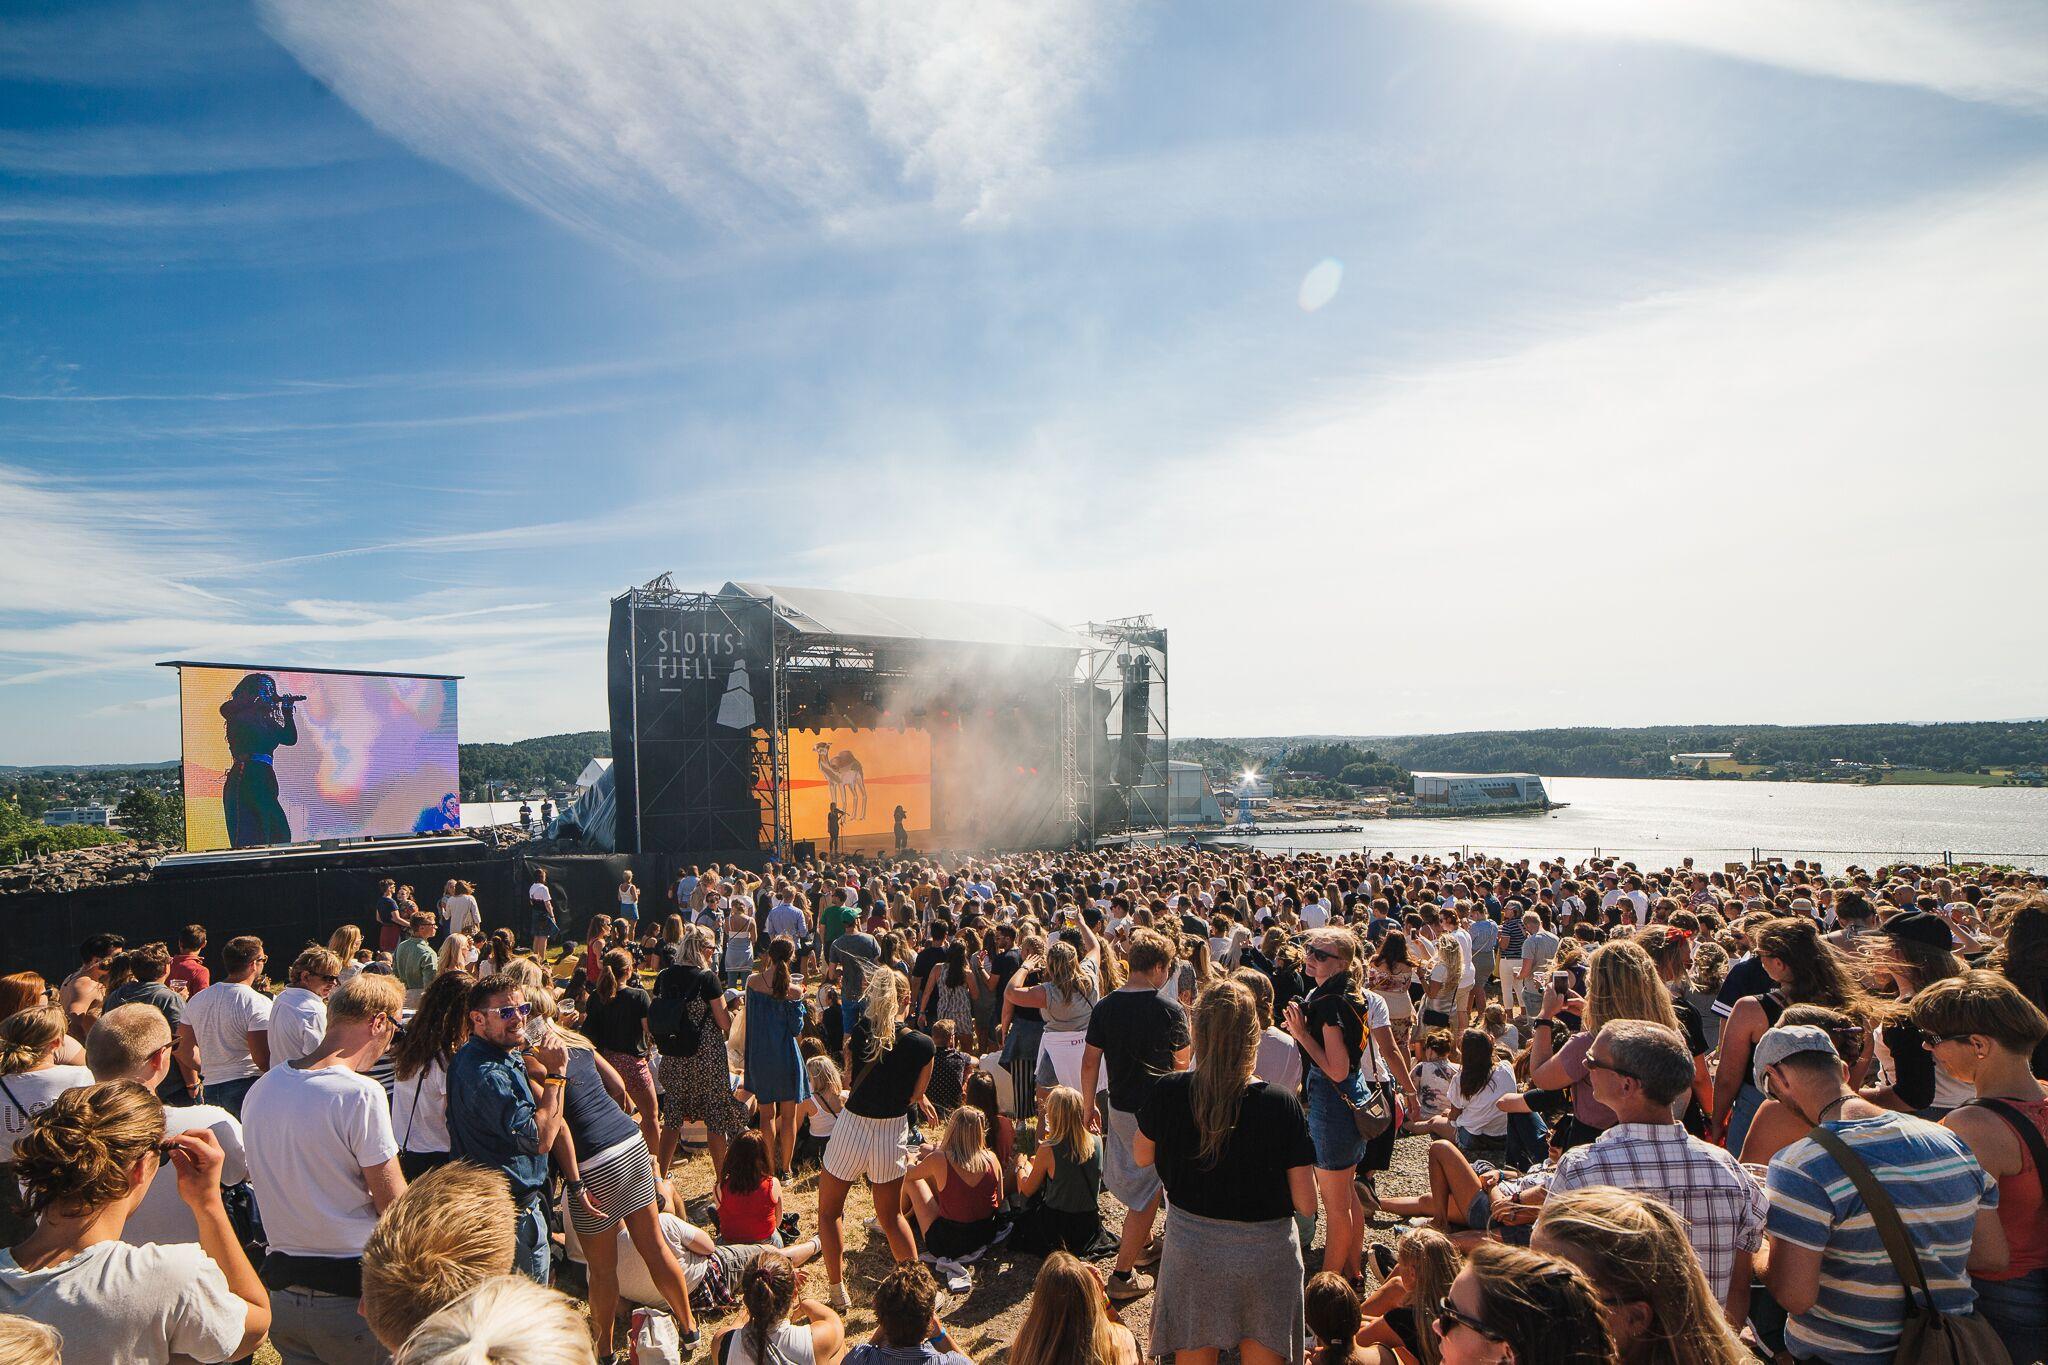 Slottsfjell Festival review, Tonsberg, Norway Norwegian acts are the